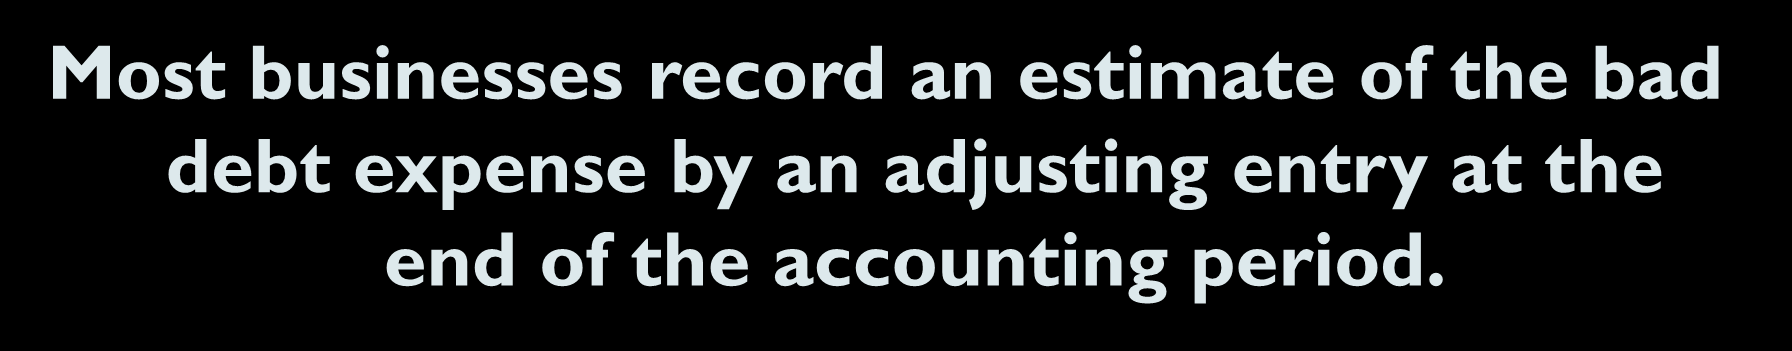 7-11 Uncollectible Accounts Receivable Most businesses record an estimate of the bad debt expense by an adjusting entry at the end of the accounting period.